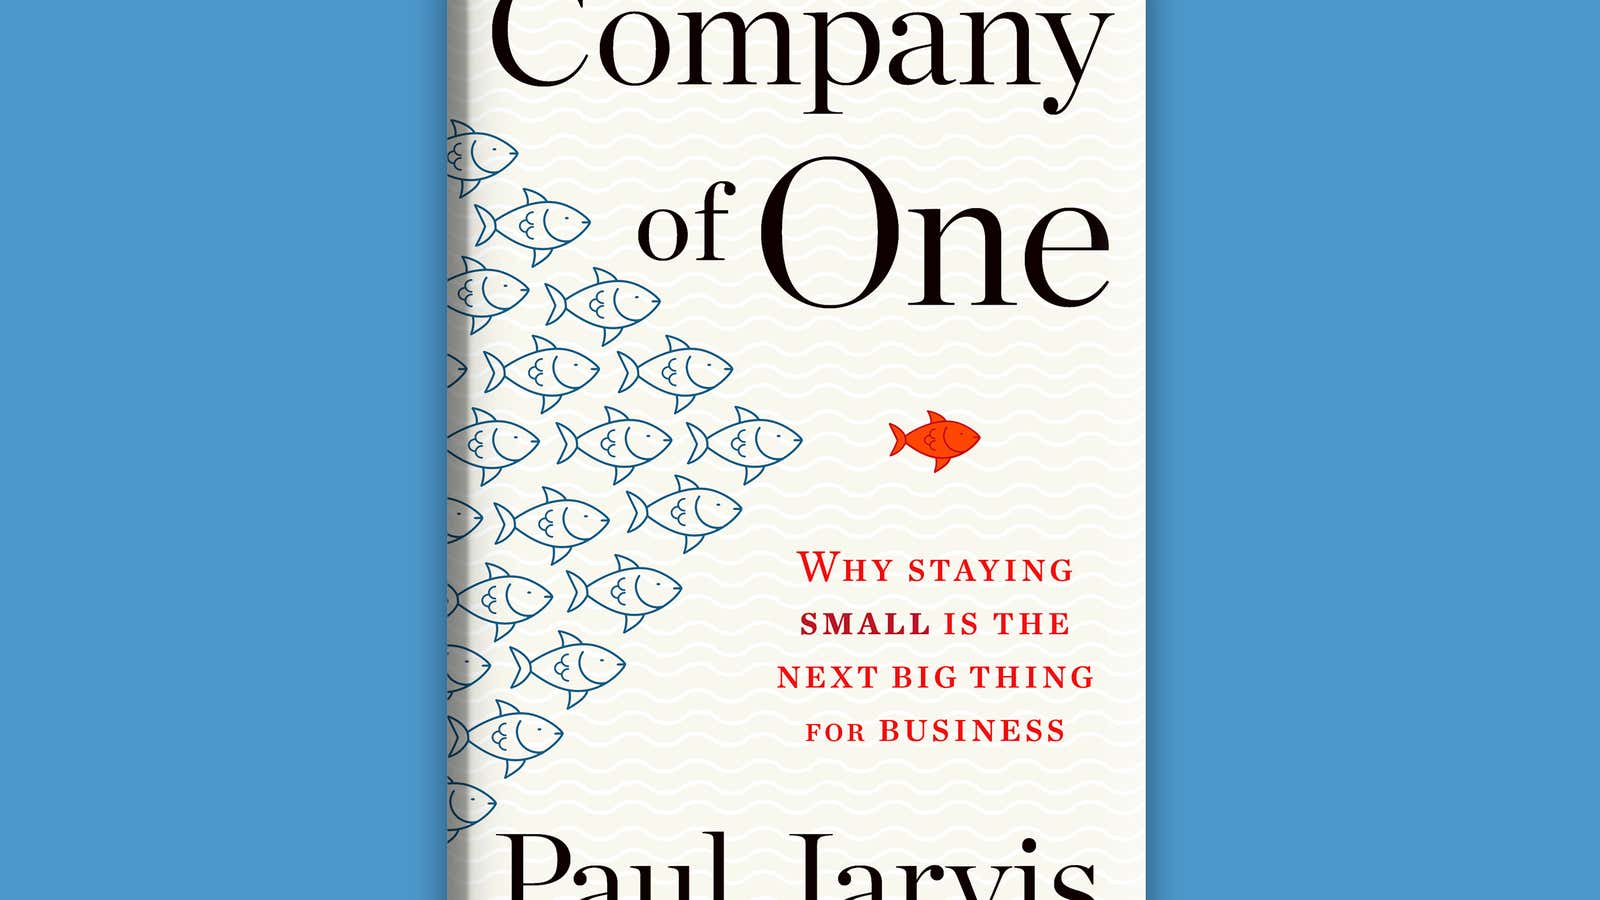 “Company of One,” by Paul Jarvis